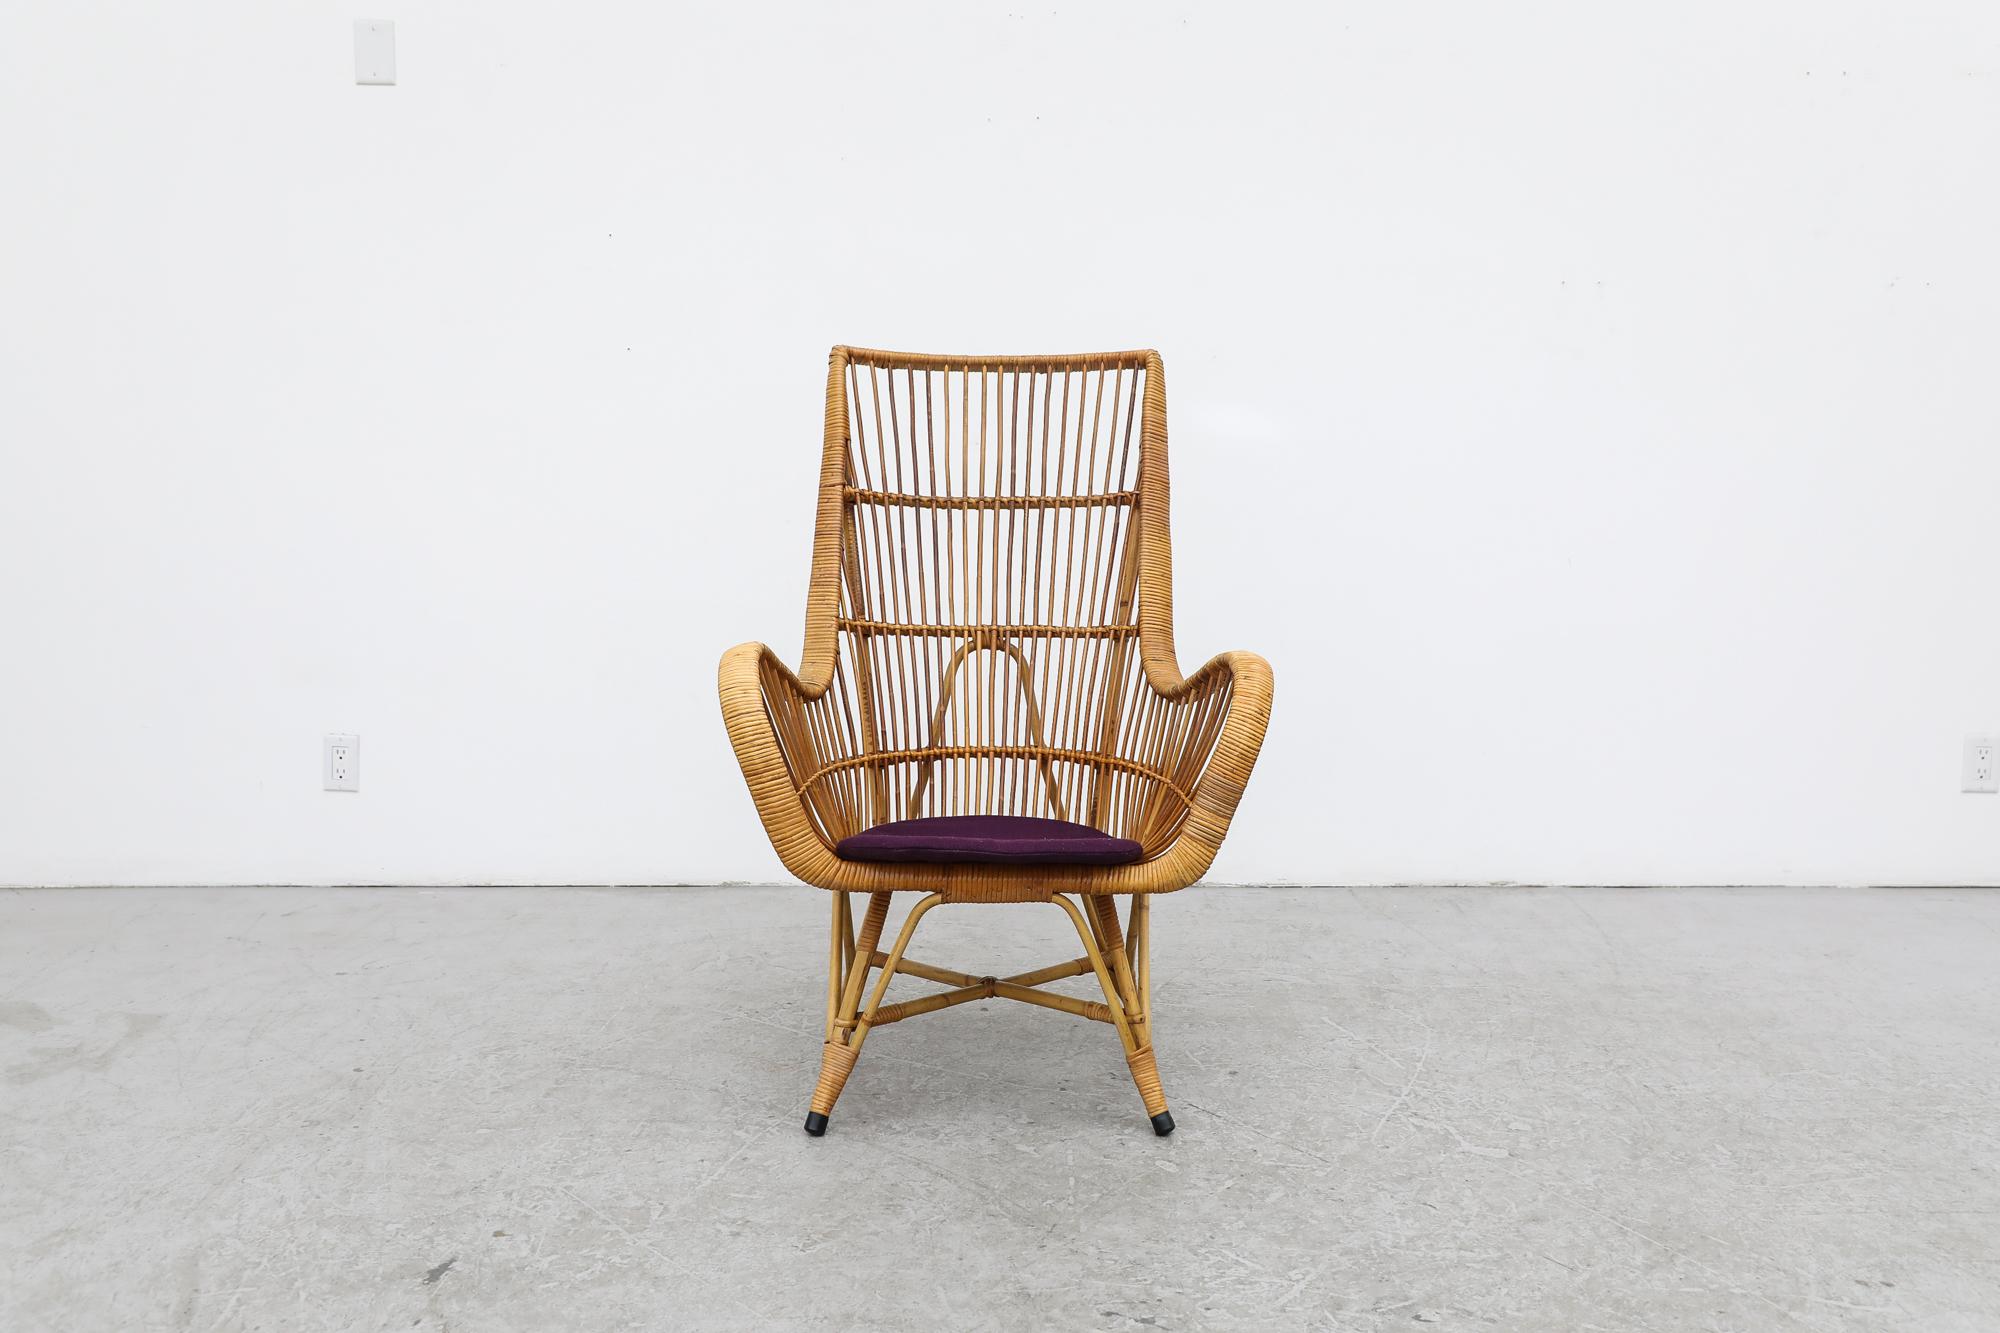 Midcentury Franco Albini inspired bamboo chair. In good original condition with some signs of use including light scratching and minimal breakage. Wear is consistent with its age and use. Shown with a seat cushion not included.